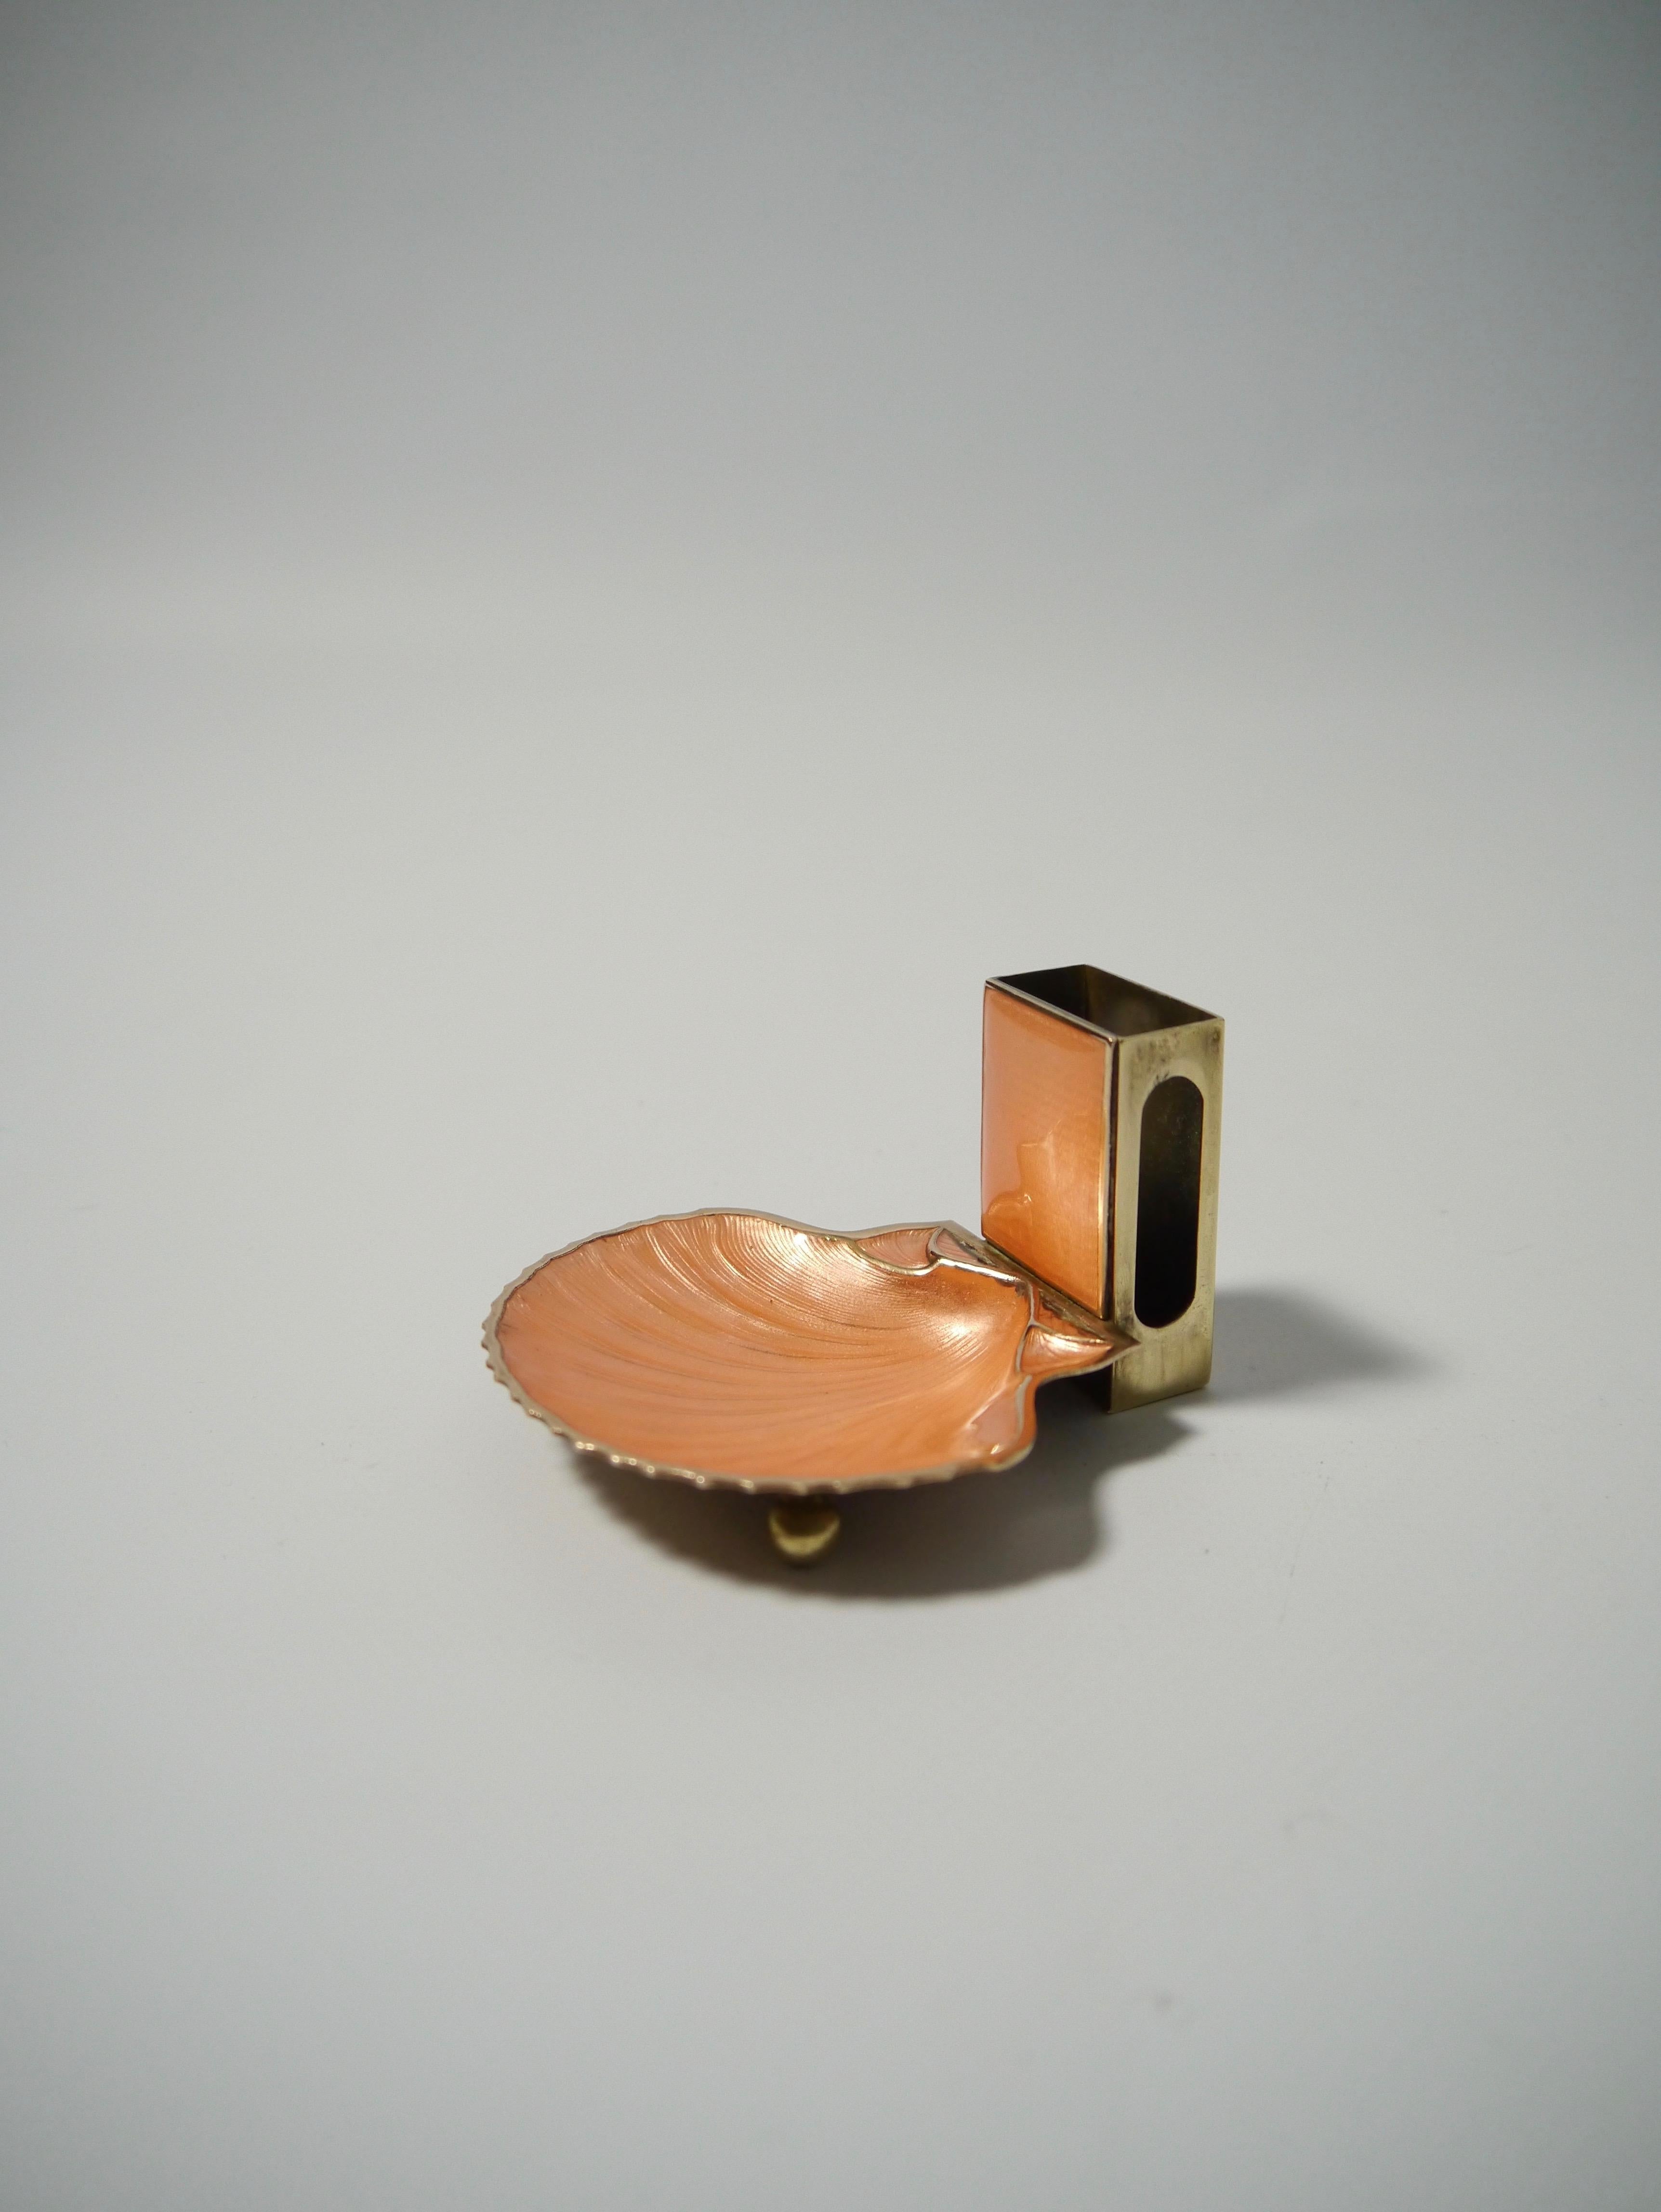 Seashell shaped Art Nouveau matchstick box holder. Gold-plated copper, seashell and box holder enameled on top/front.